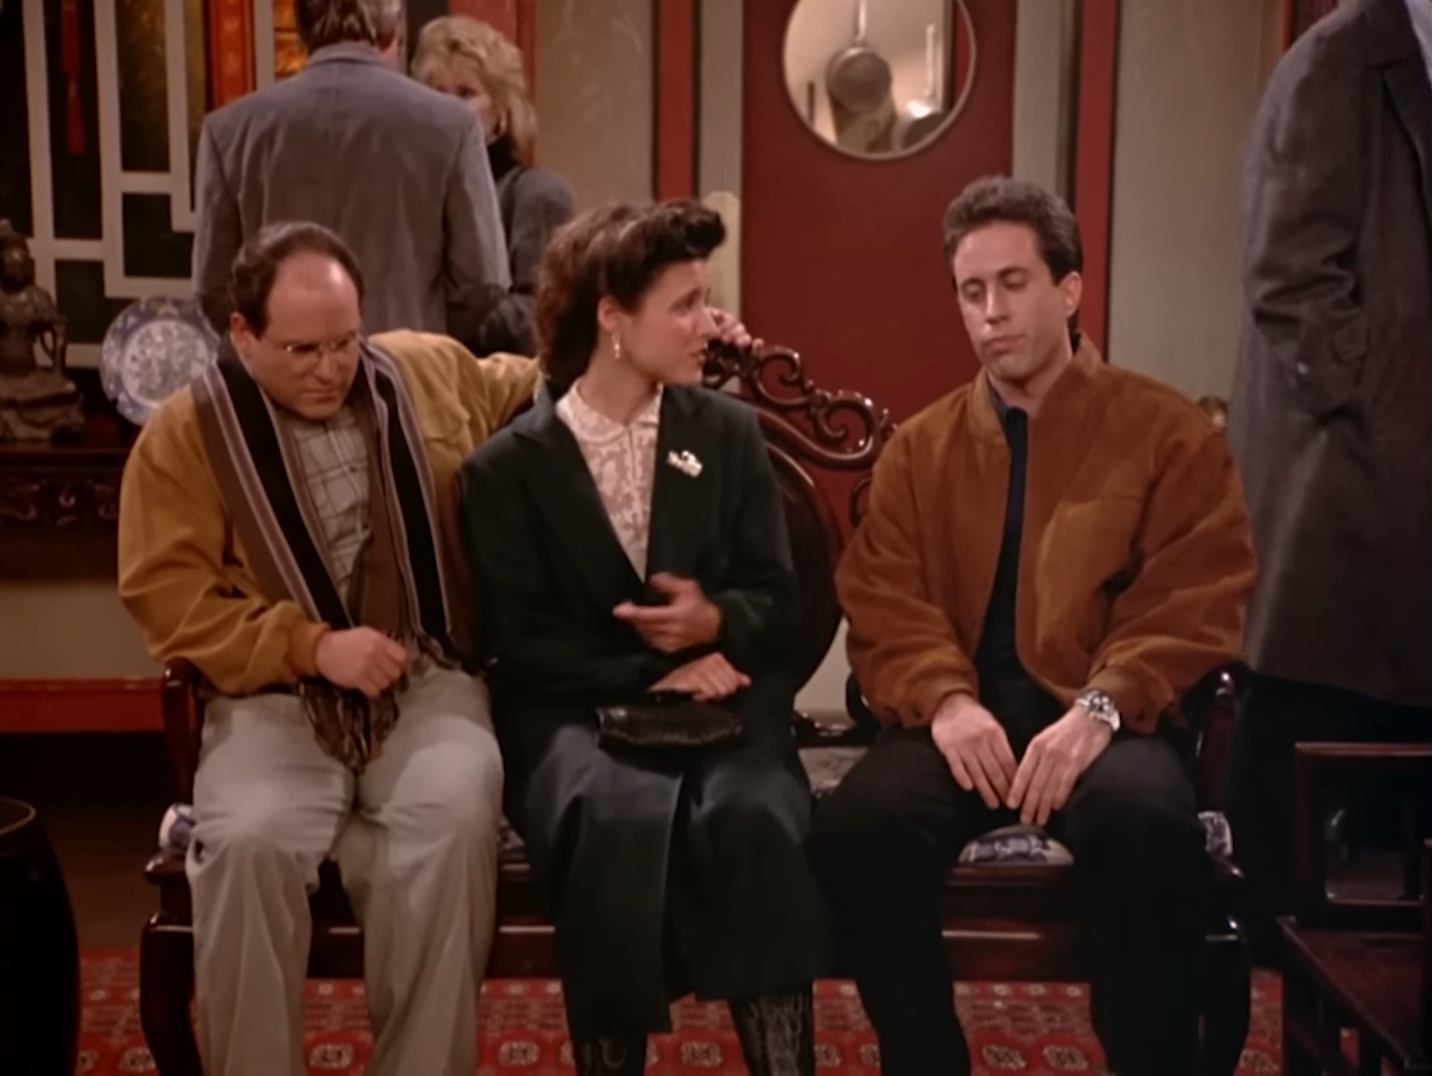 So when exactly did George, Elaine, and Kramer go to Yankee